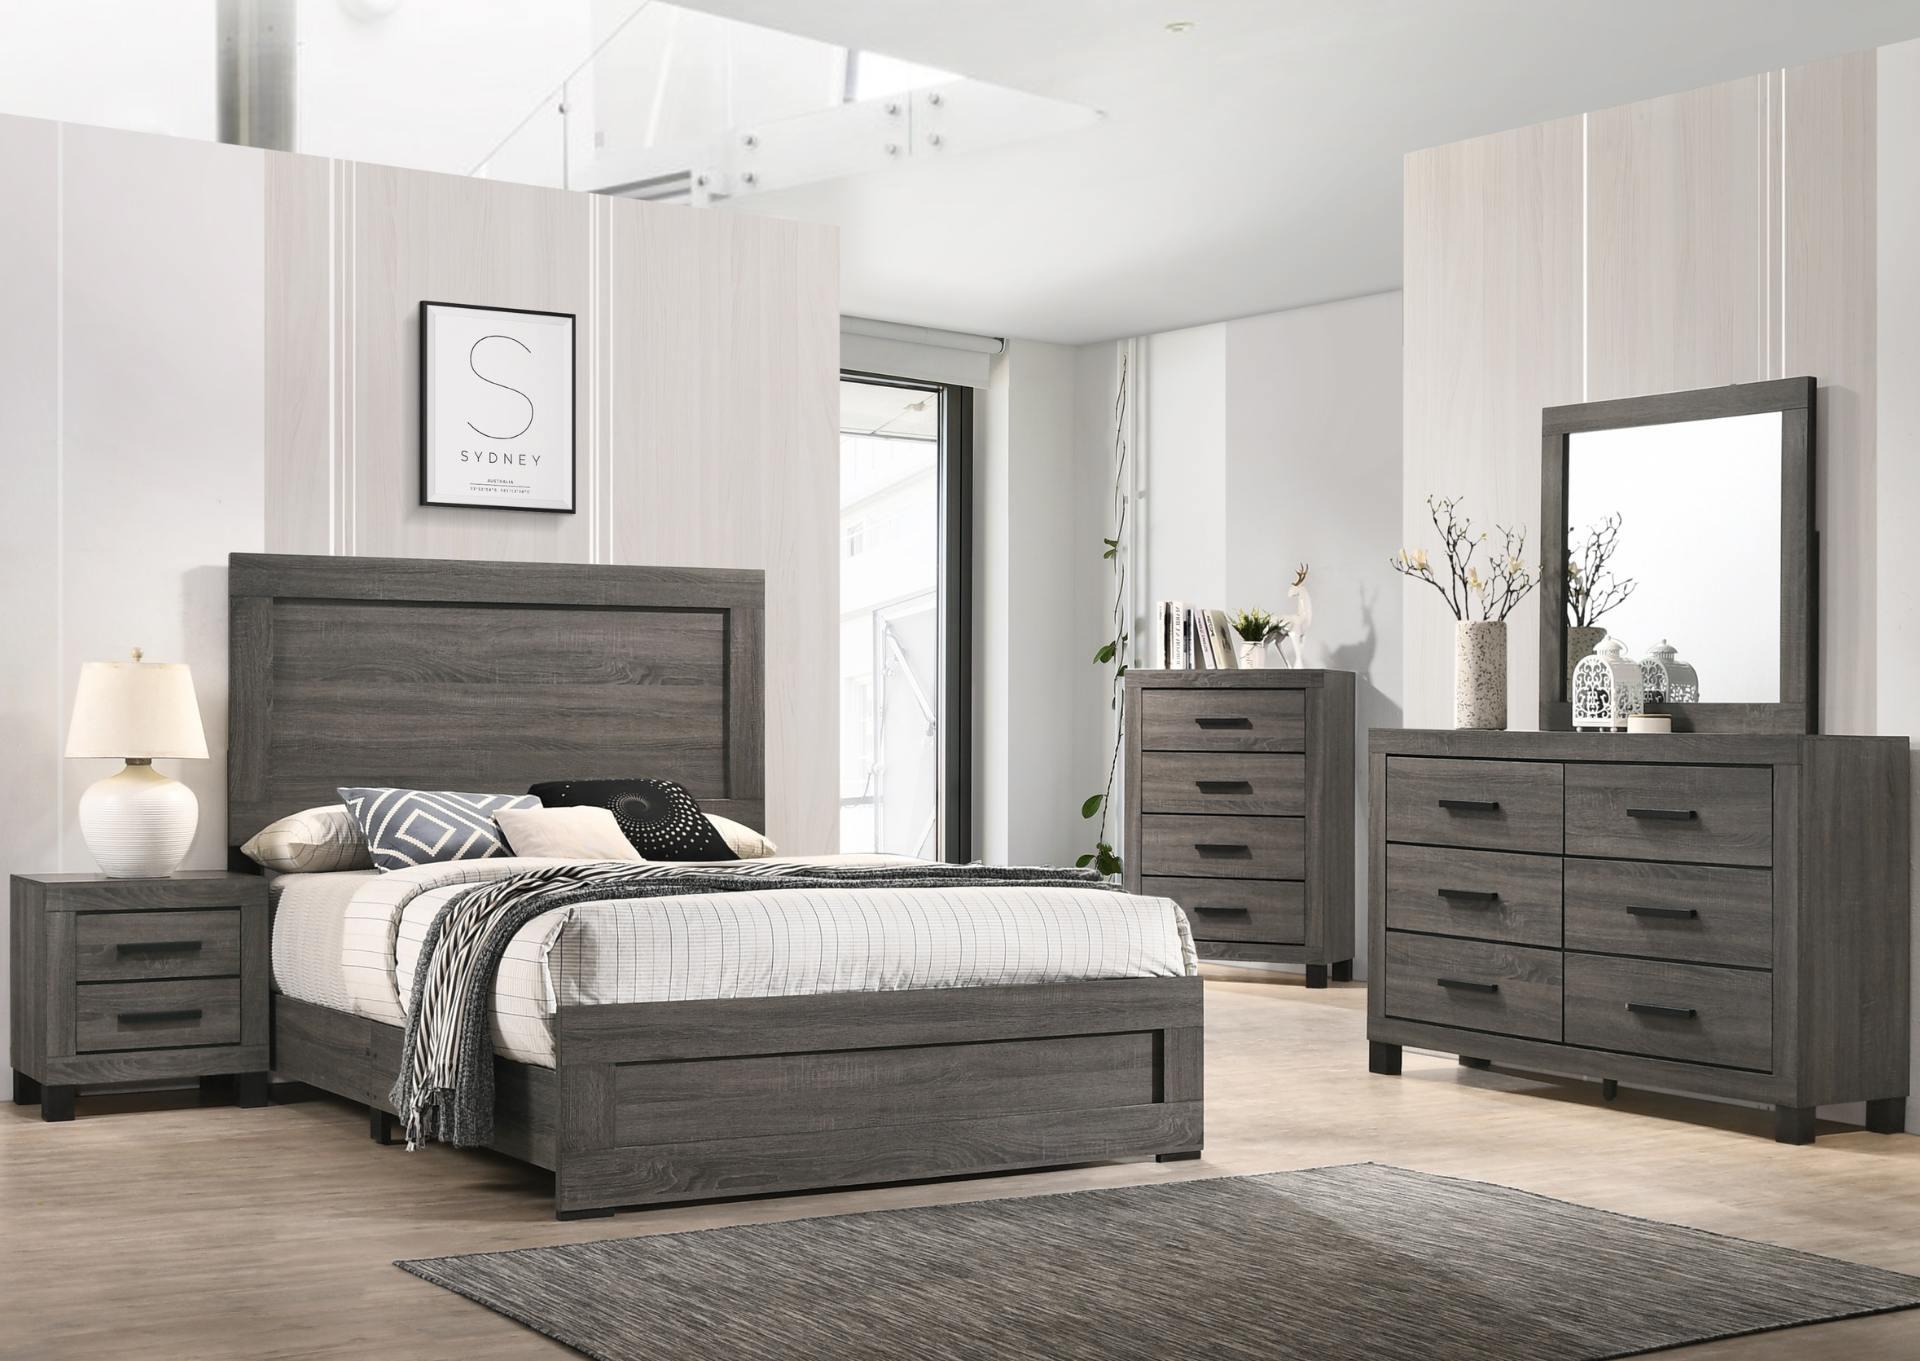 AMELIE GREY KING BED,LIFESTYLE FURNITURE